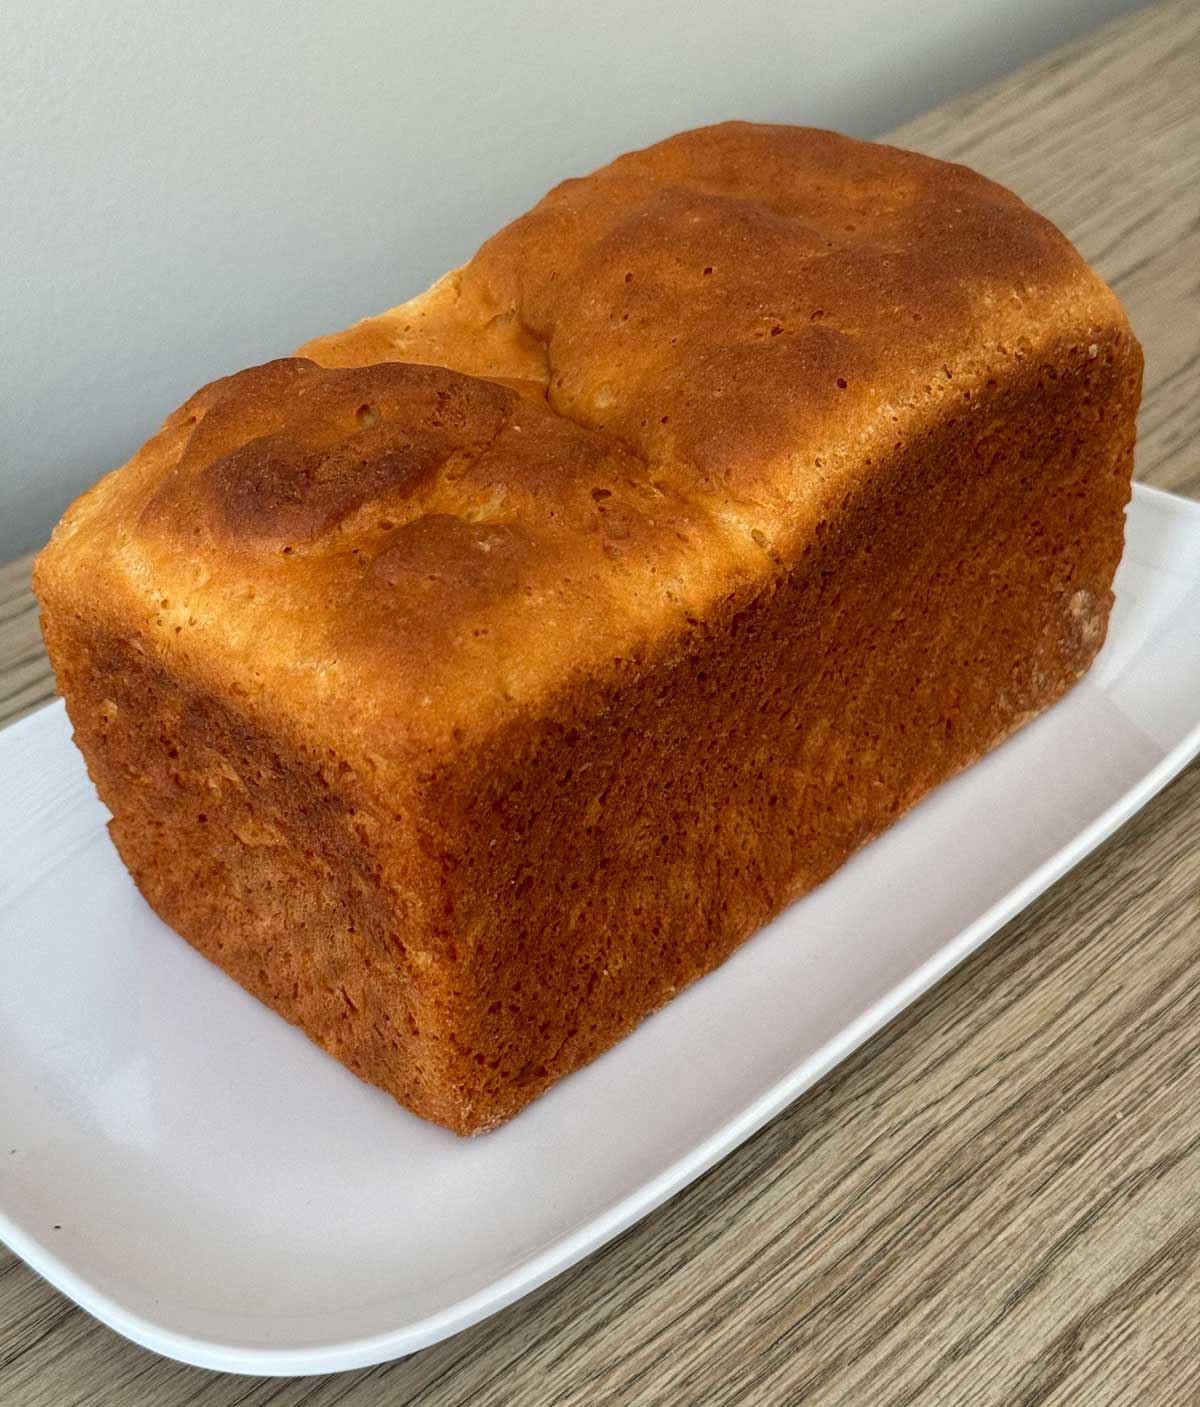 Gluten-Free Sandwich Bread made with Cup4Cup